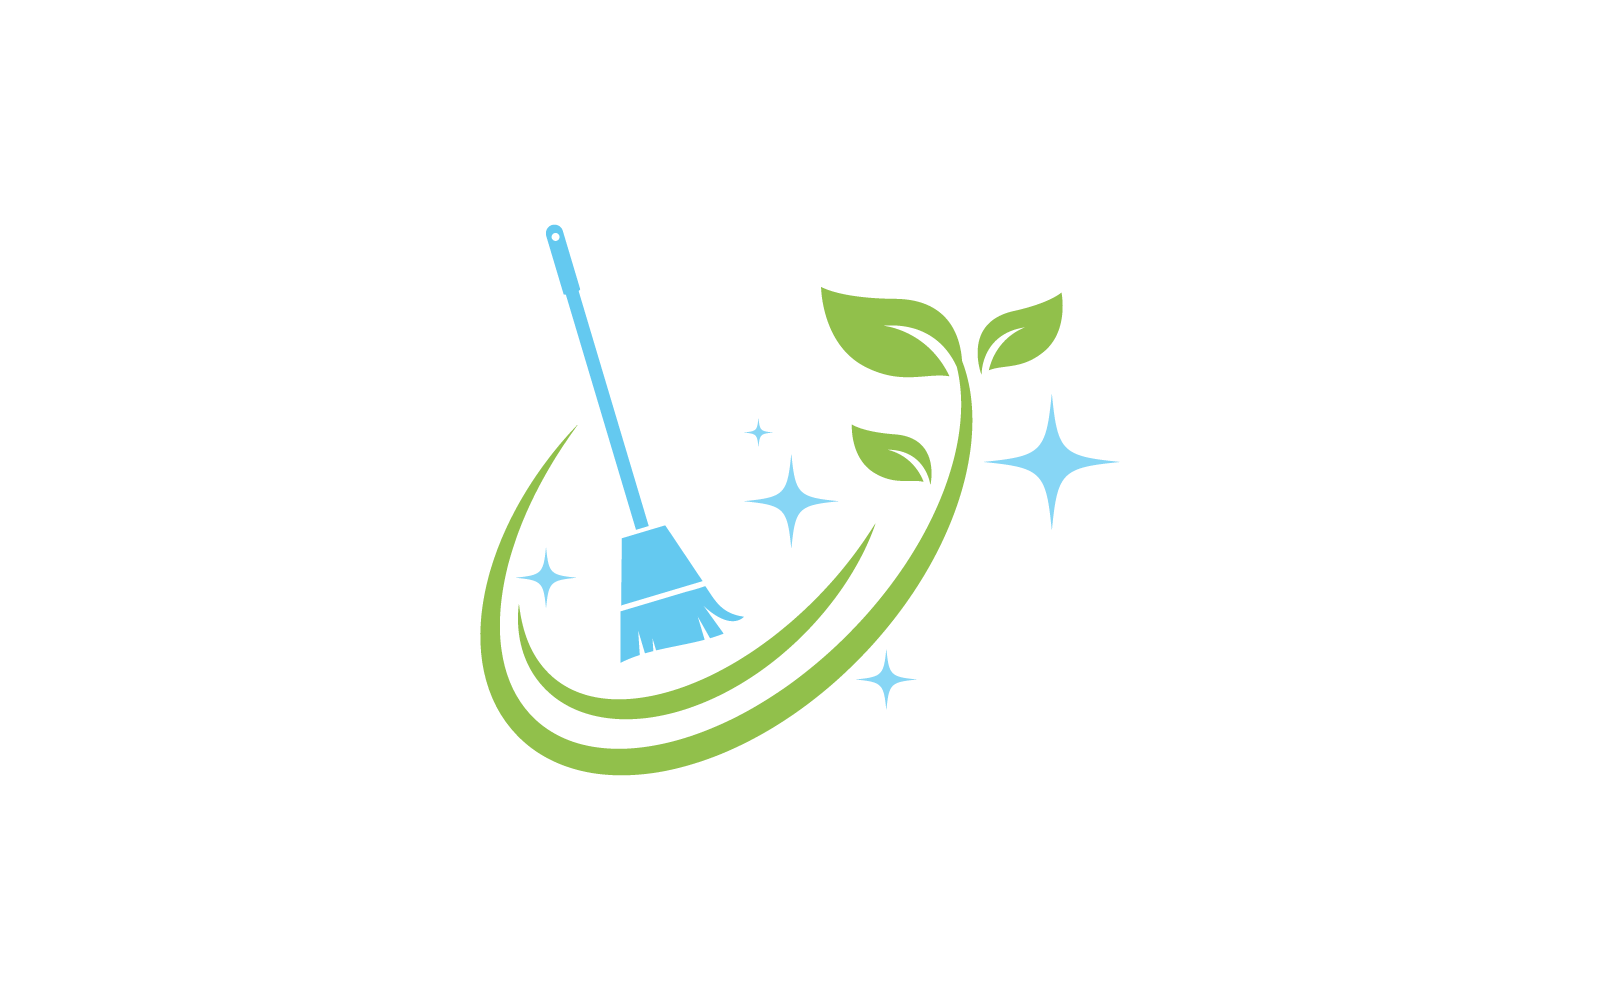 Cleaning logo and symbol illustration template